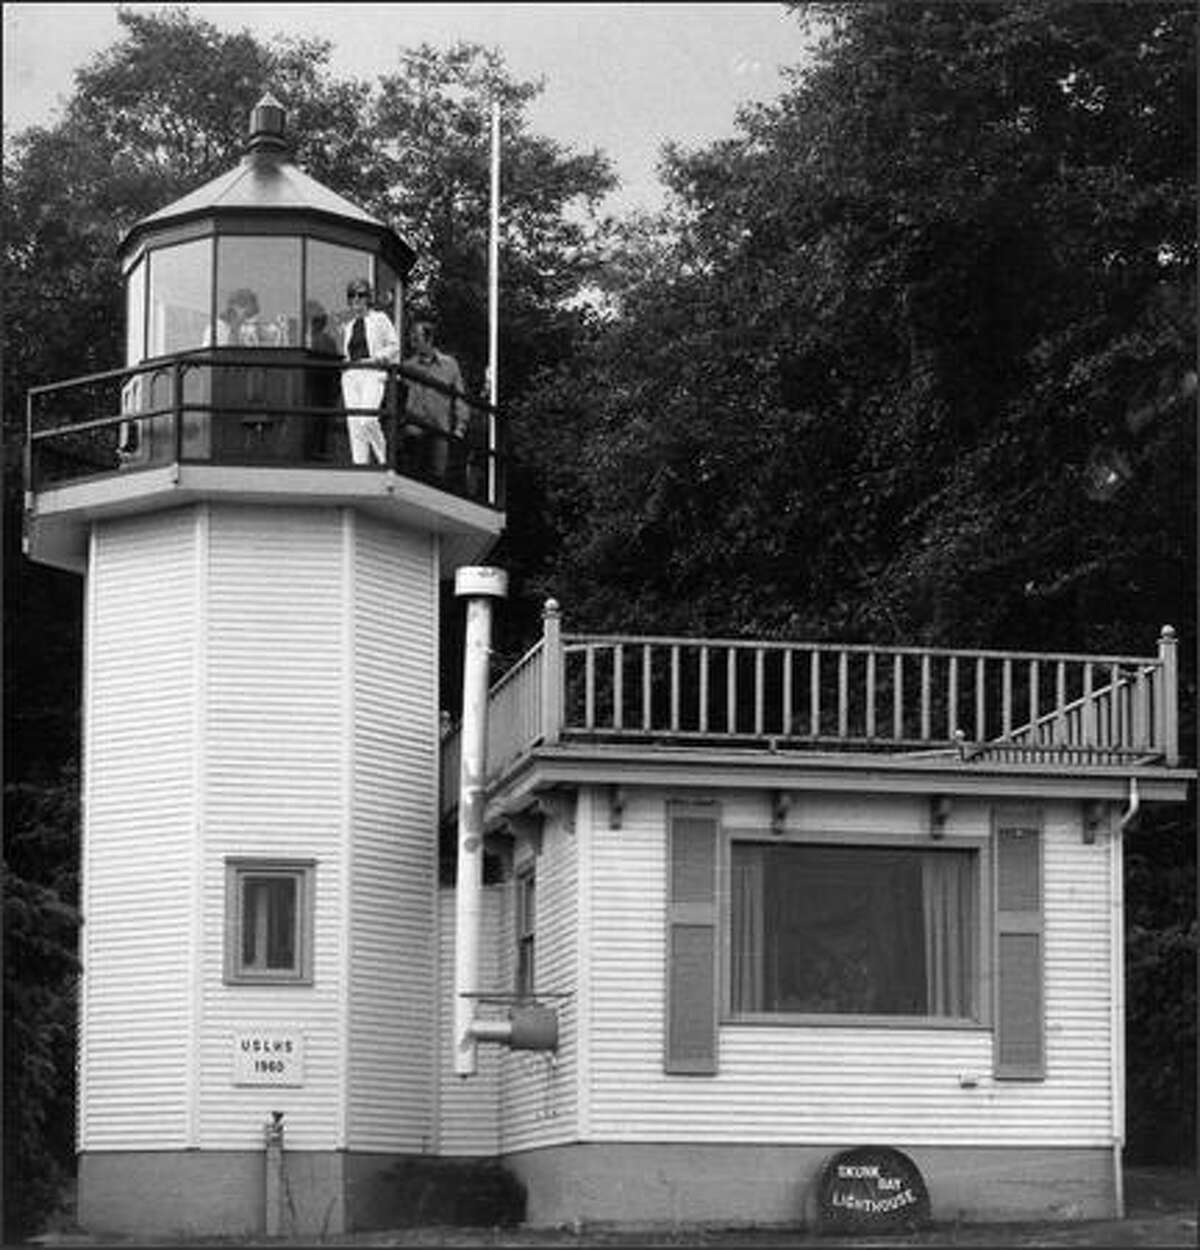 Skunk Bay Lighthouse is inspected by some of the new owners in September, 1970. (Seattle Post-Intelligencer)